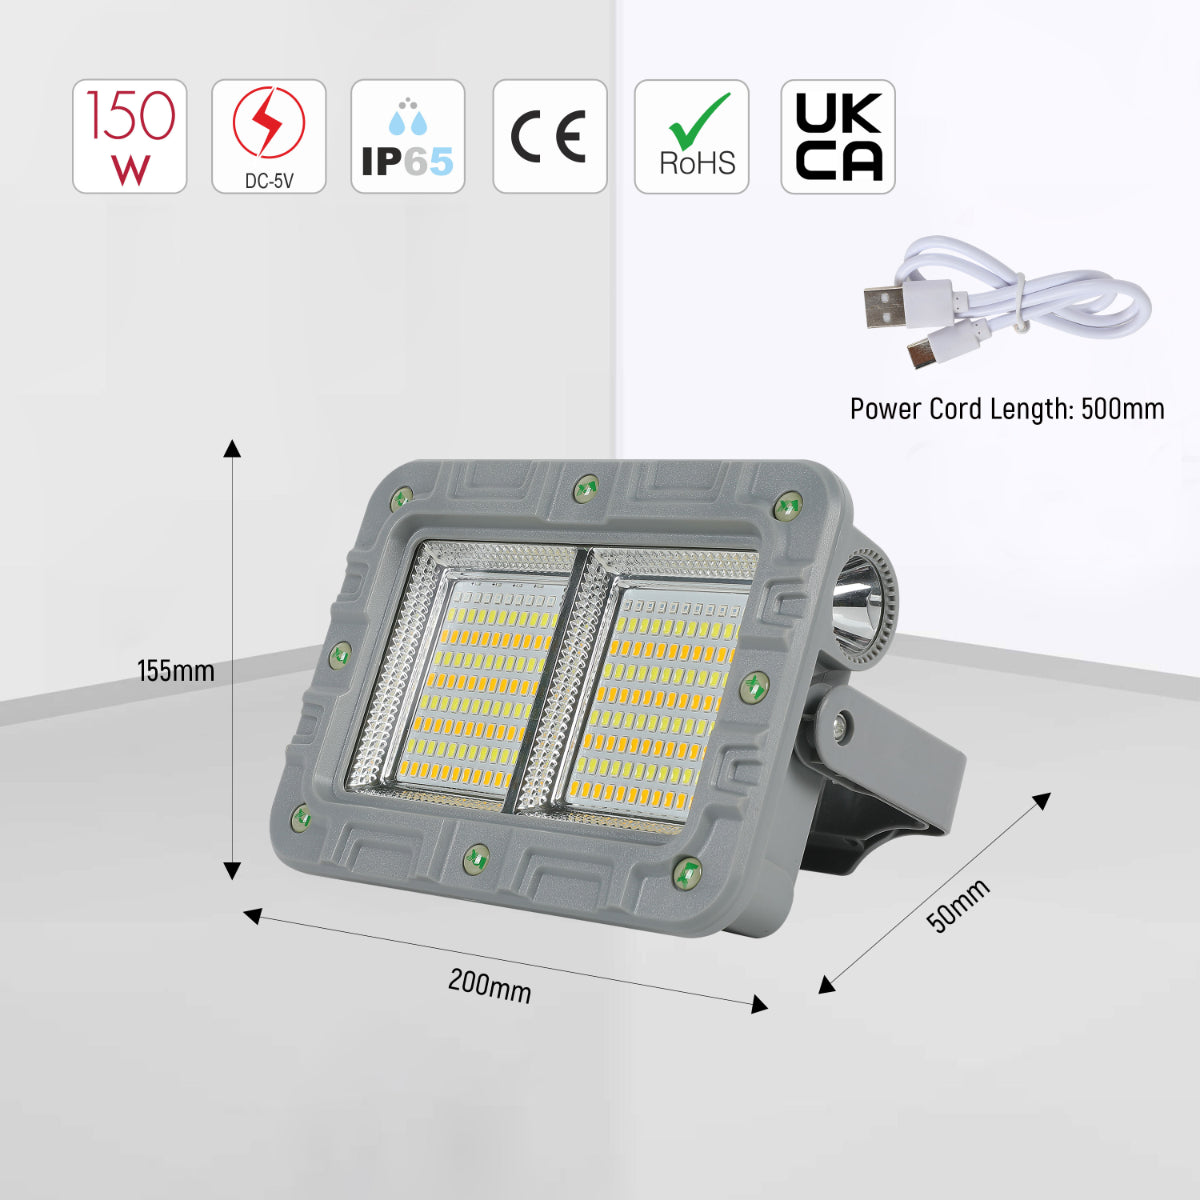 Size and certifications of Solar Rechargeable Emergency Fllodlight 5 in 1 224-03350